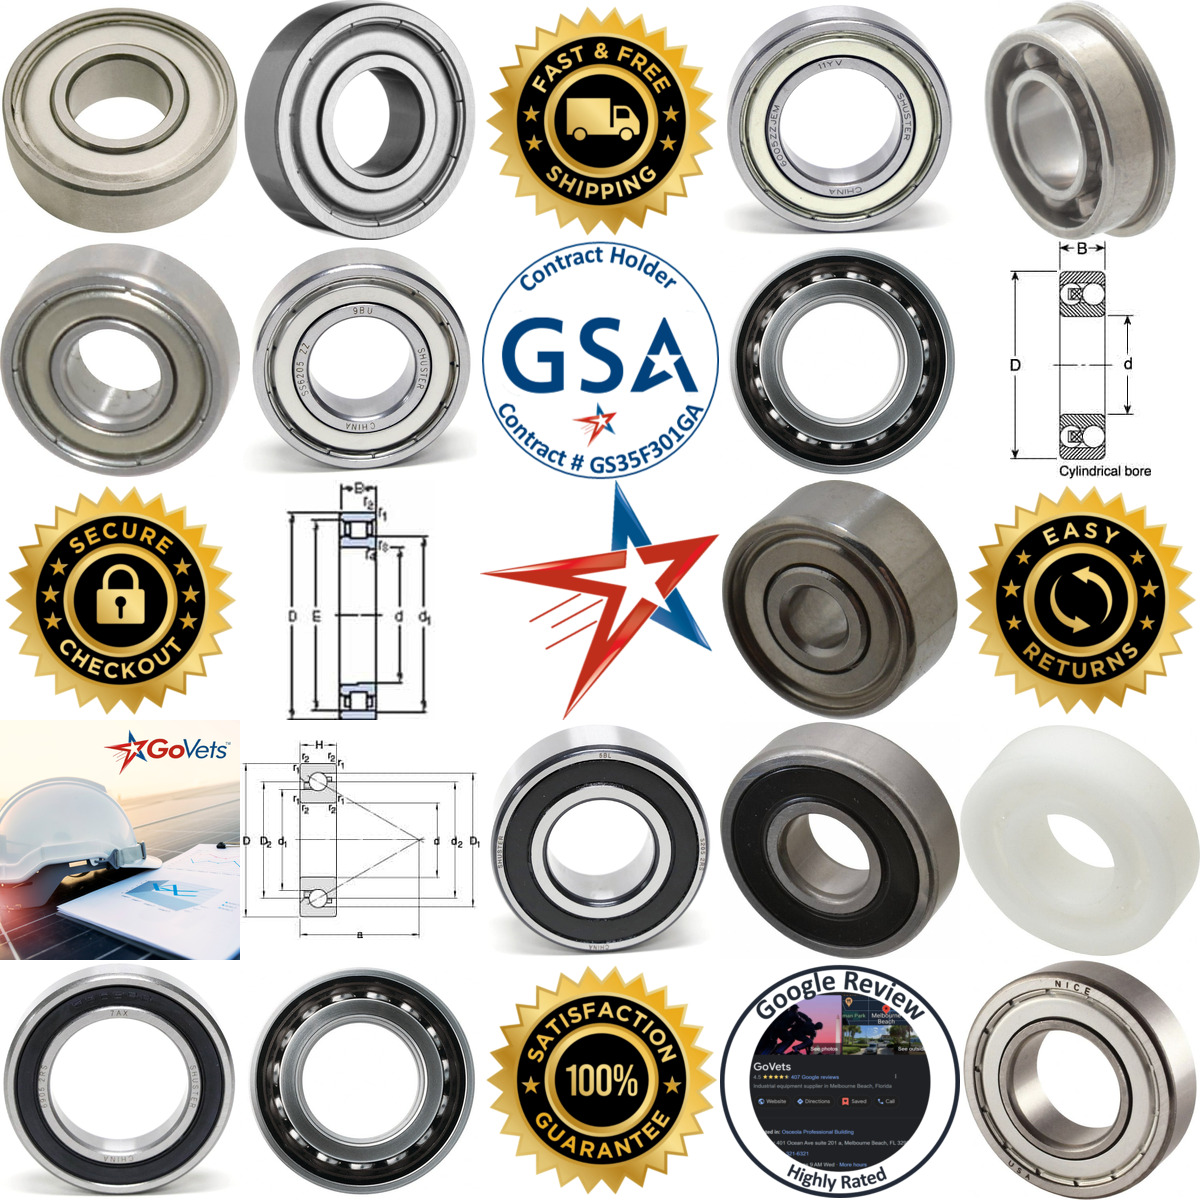 A selection of Radial Ball Bearings products on GoVets